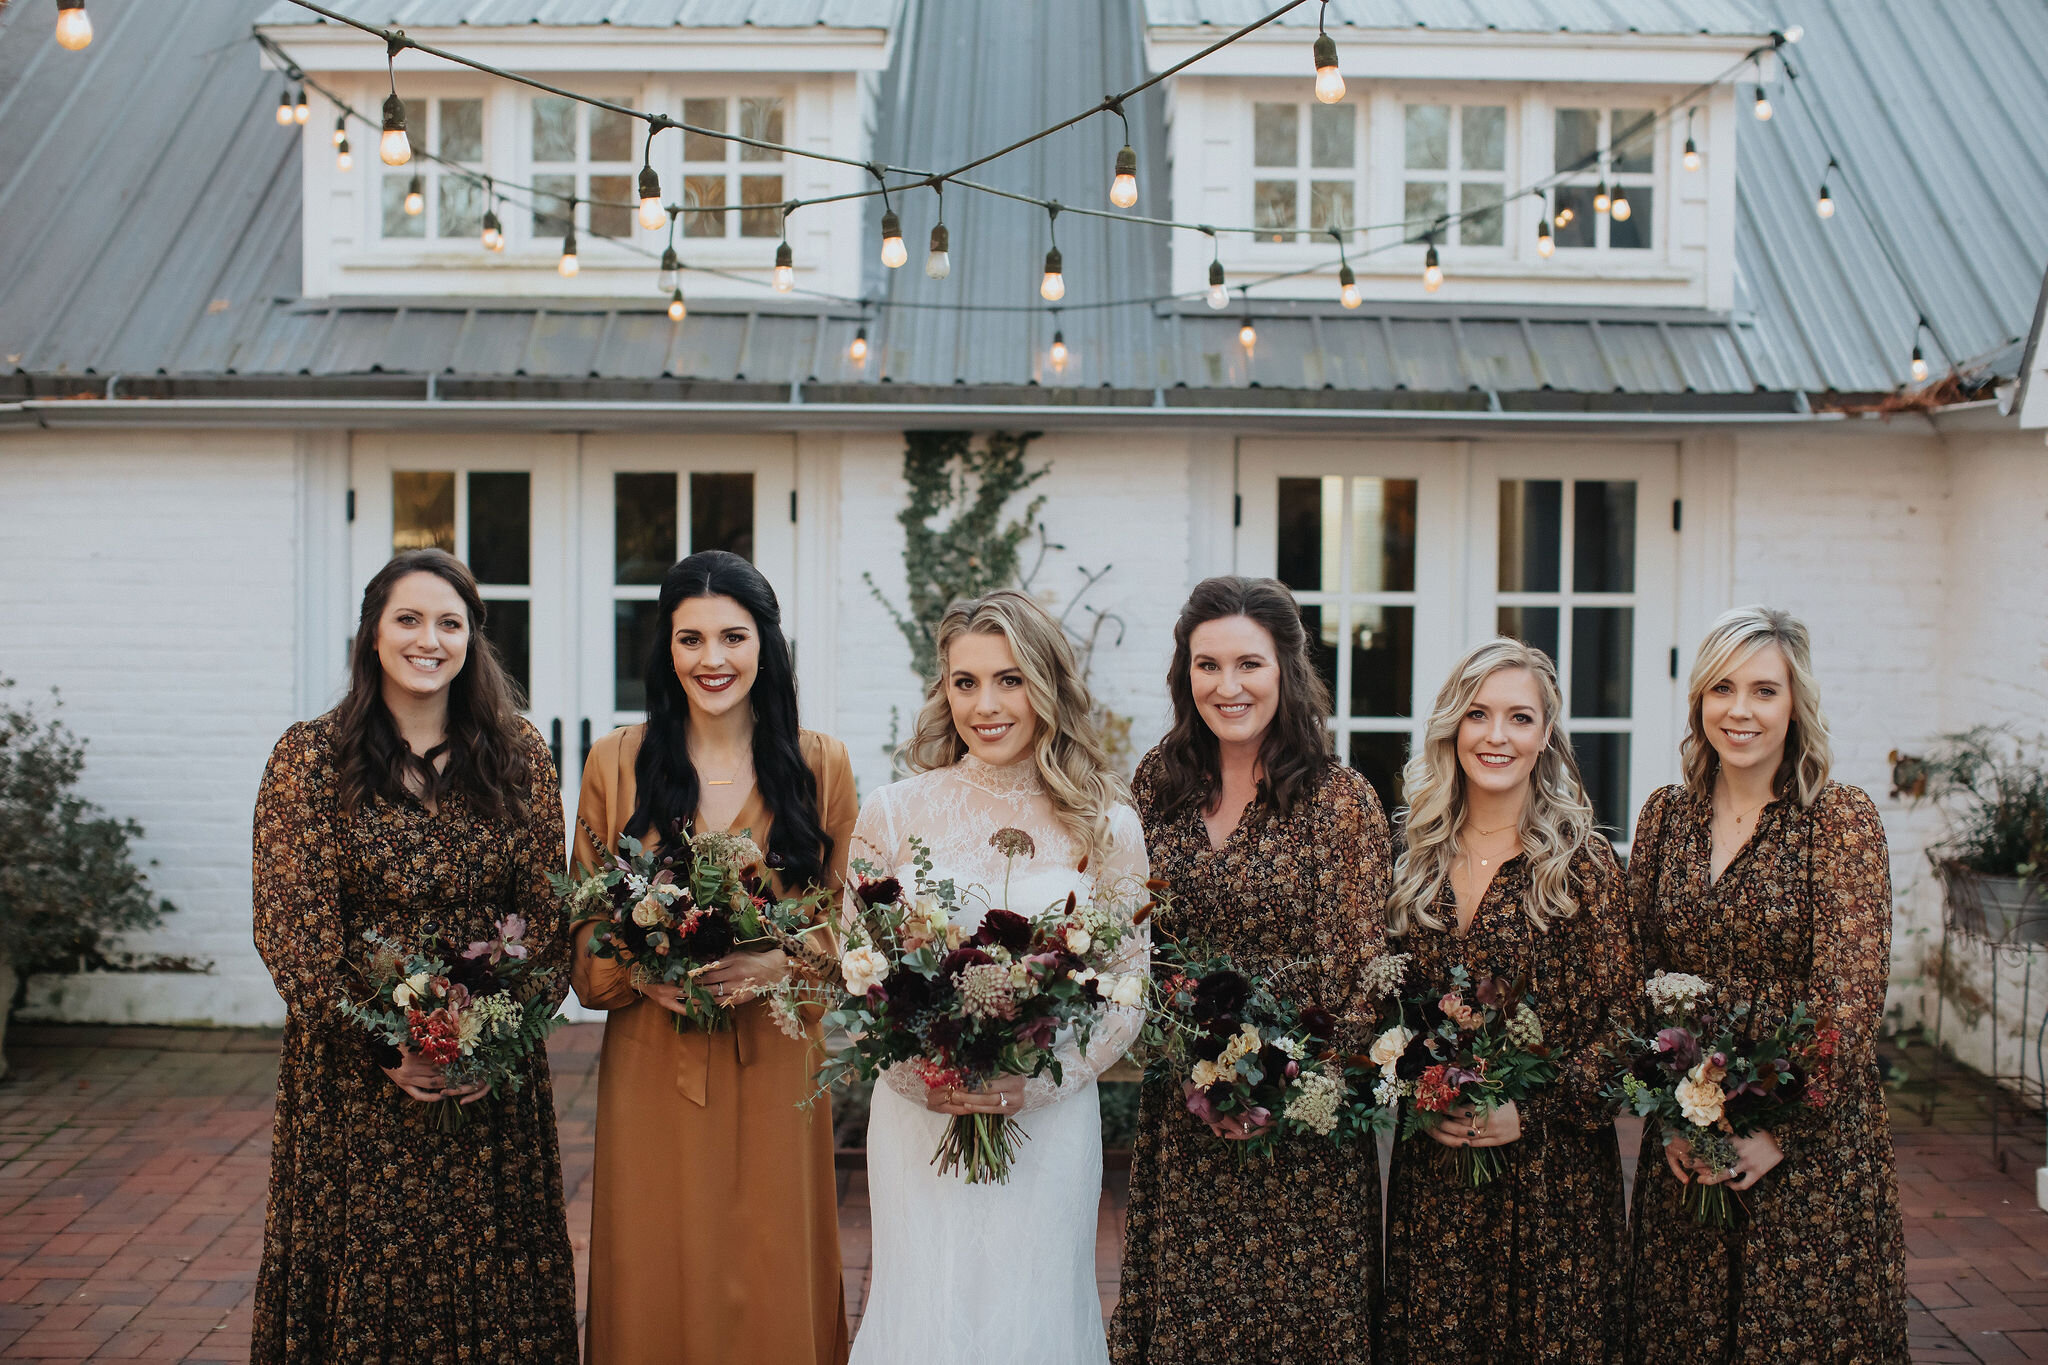 Romantic and earthy bridesmaid's bouquets filled Chocolate Cosmos, Queen Ann's Lace, Baby Eucalyptus, Rust Bunny Tails, Festival Bush, Antique Carnations, Burgundy Ranunculus, and Brown Lisianthus. Designed by Nashville wedding floral designer, Rose…